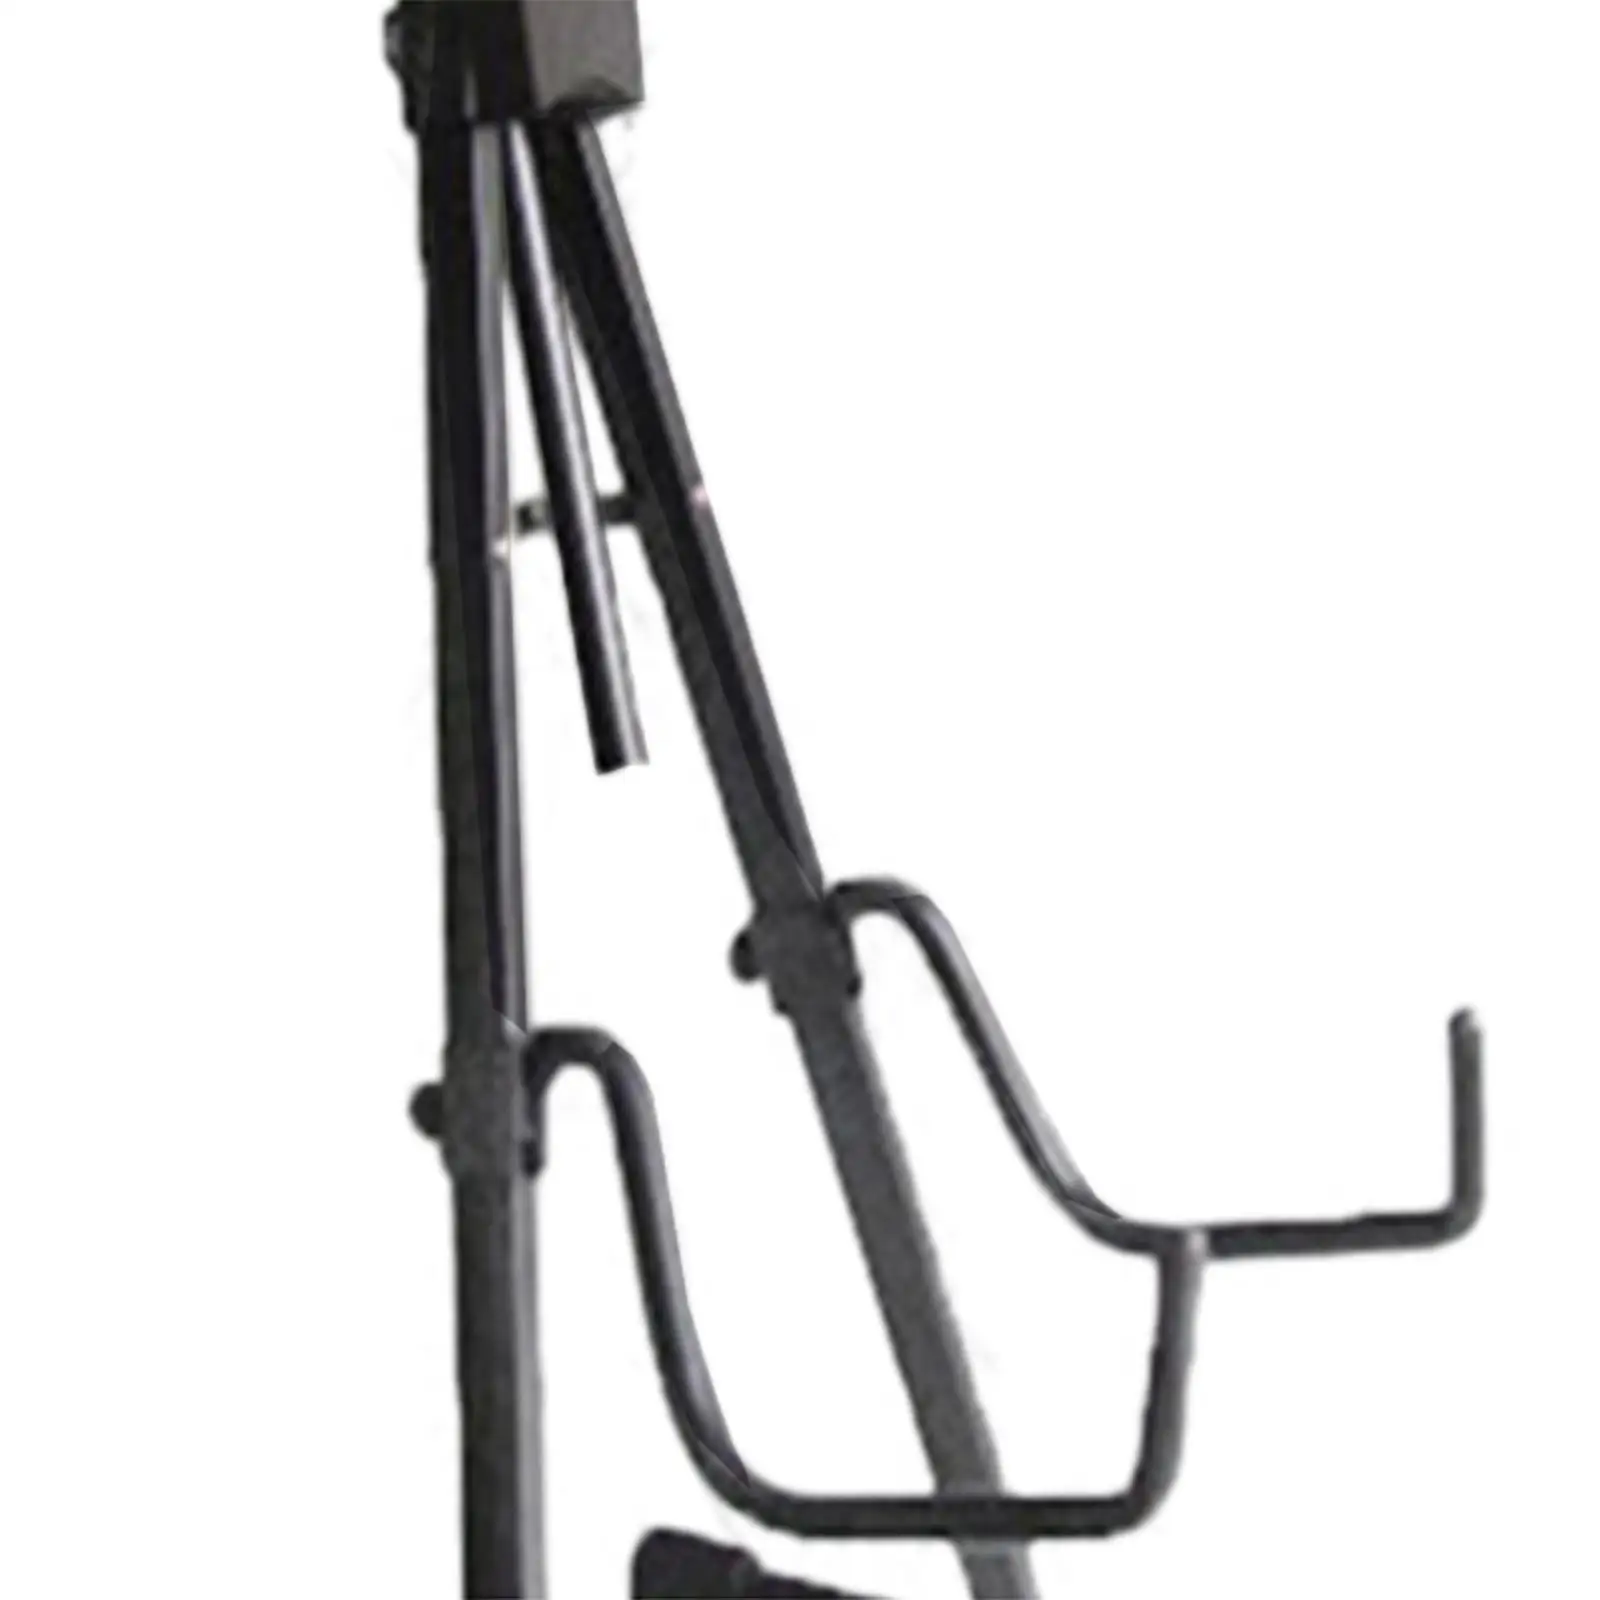 Adjustable Cello Stand with Hook Foldable Silicone Padding On The Support Arms Compact Design Accessory Guitar Instrument Stand